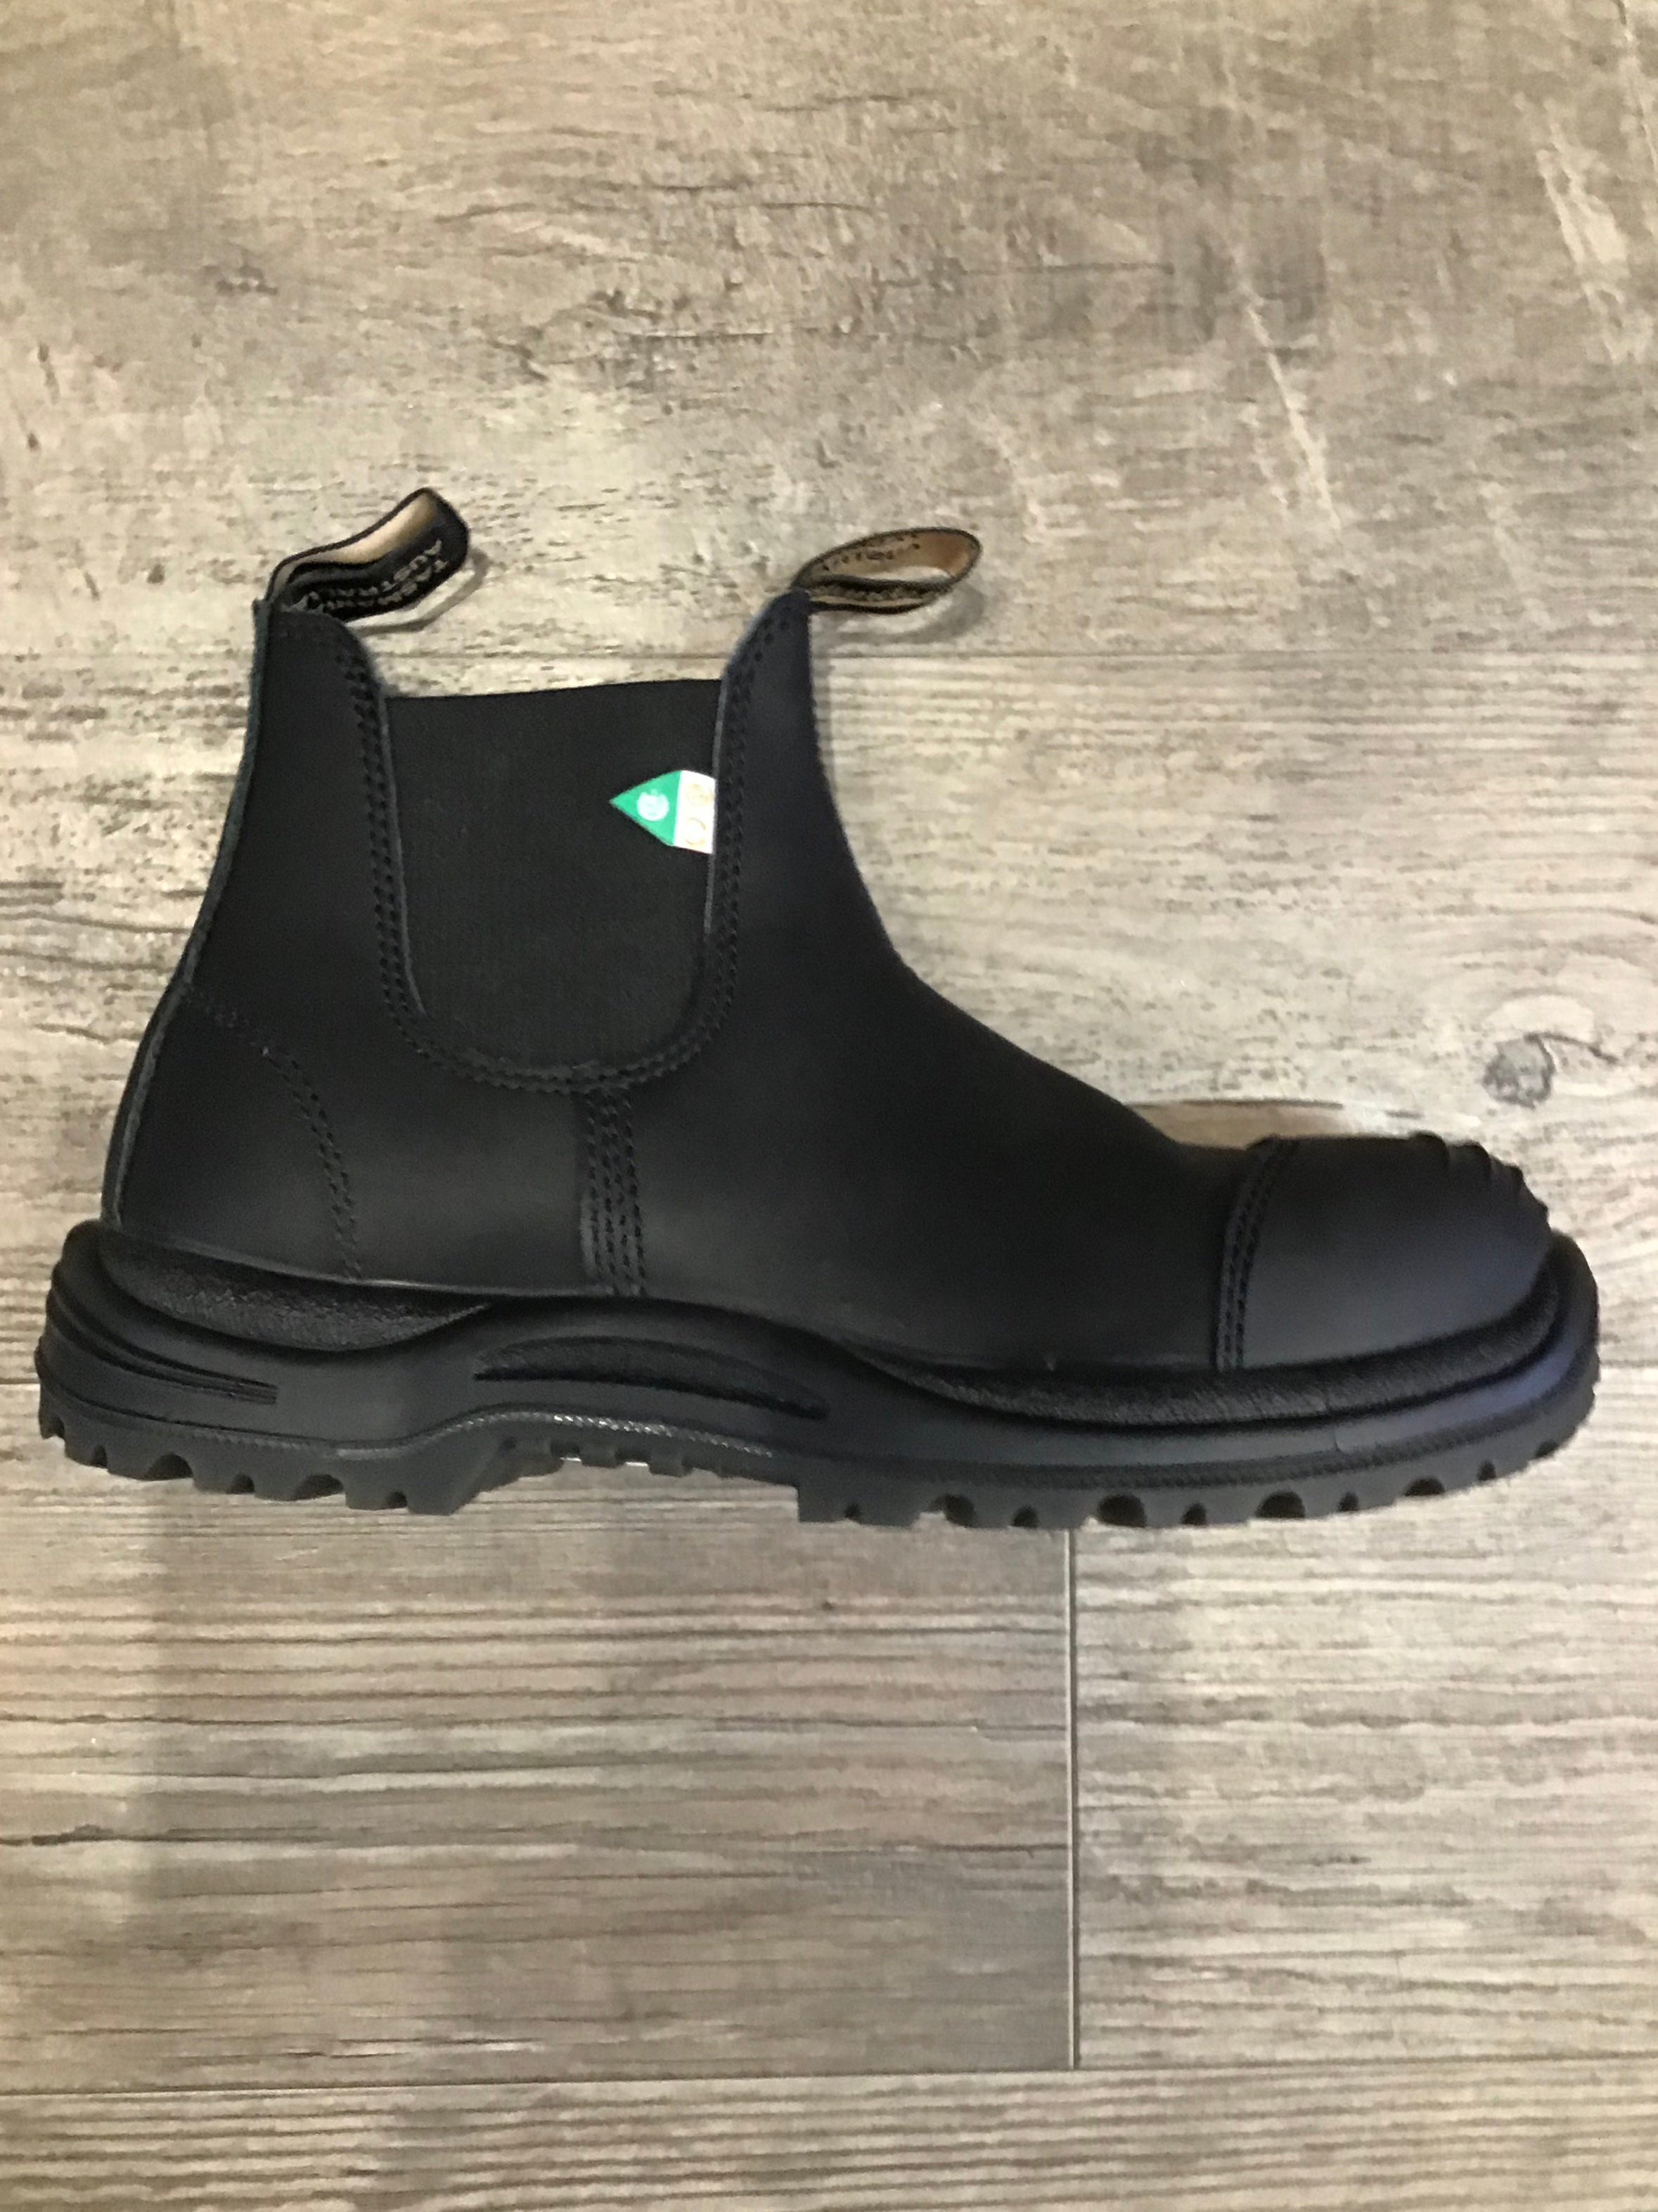 Blundstone 168 CSA Work & Safety Rubber Toe Cap Black Boot